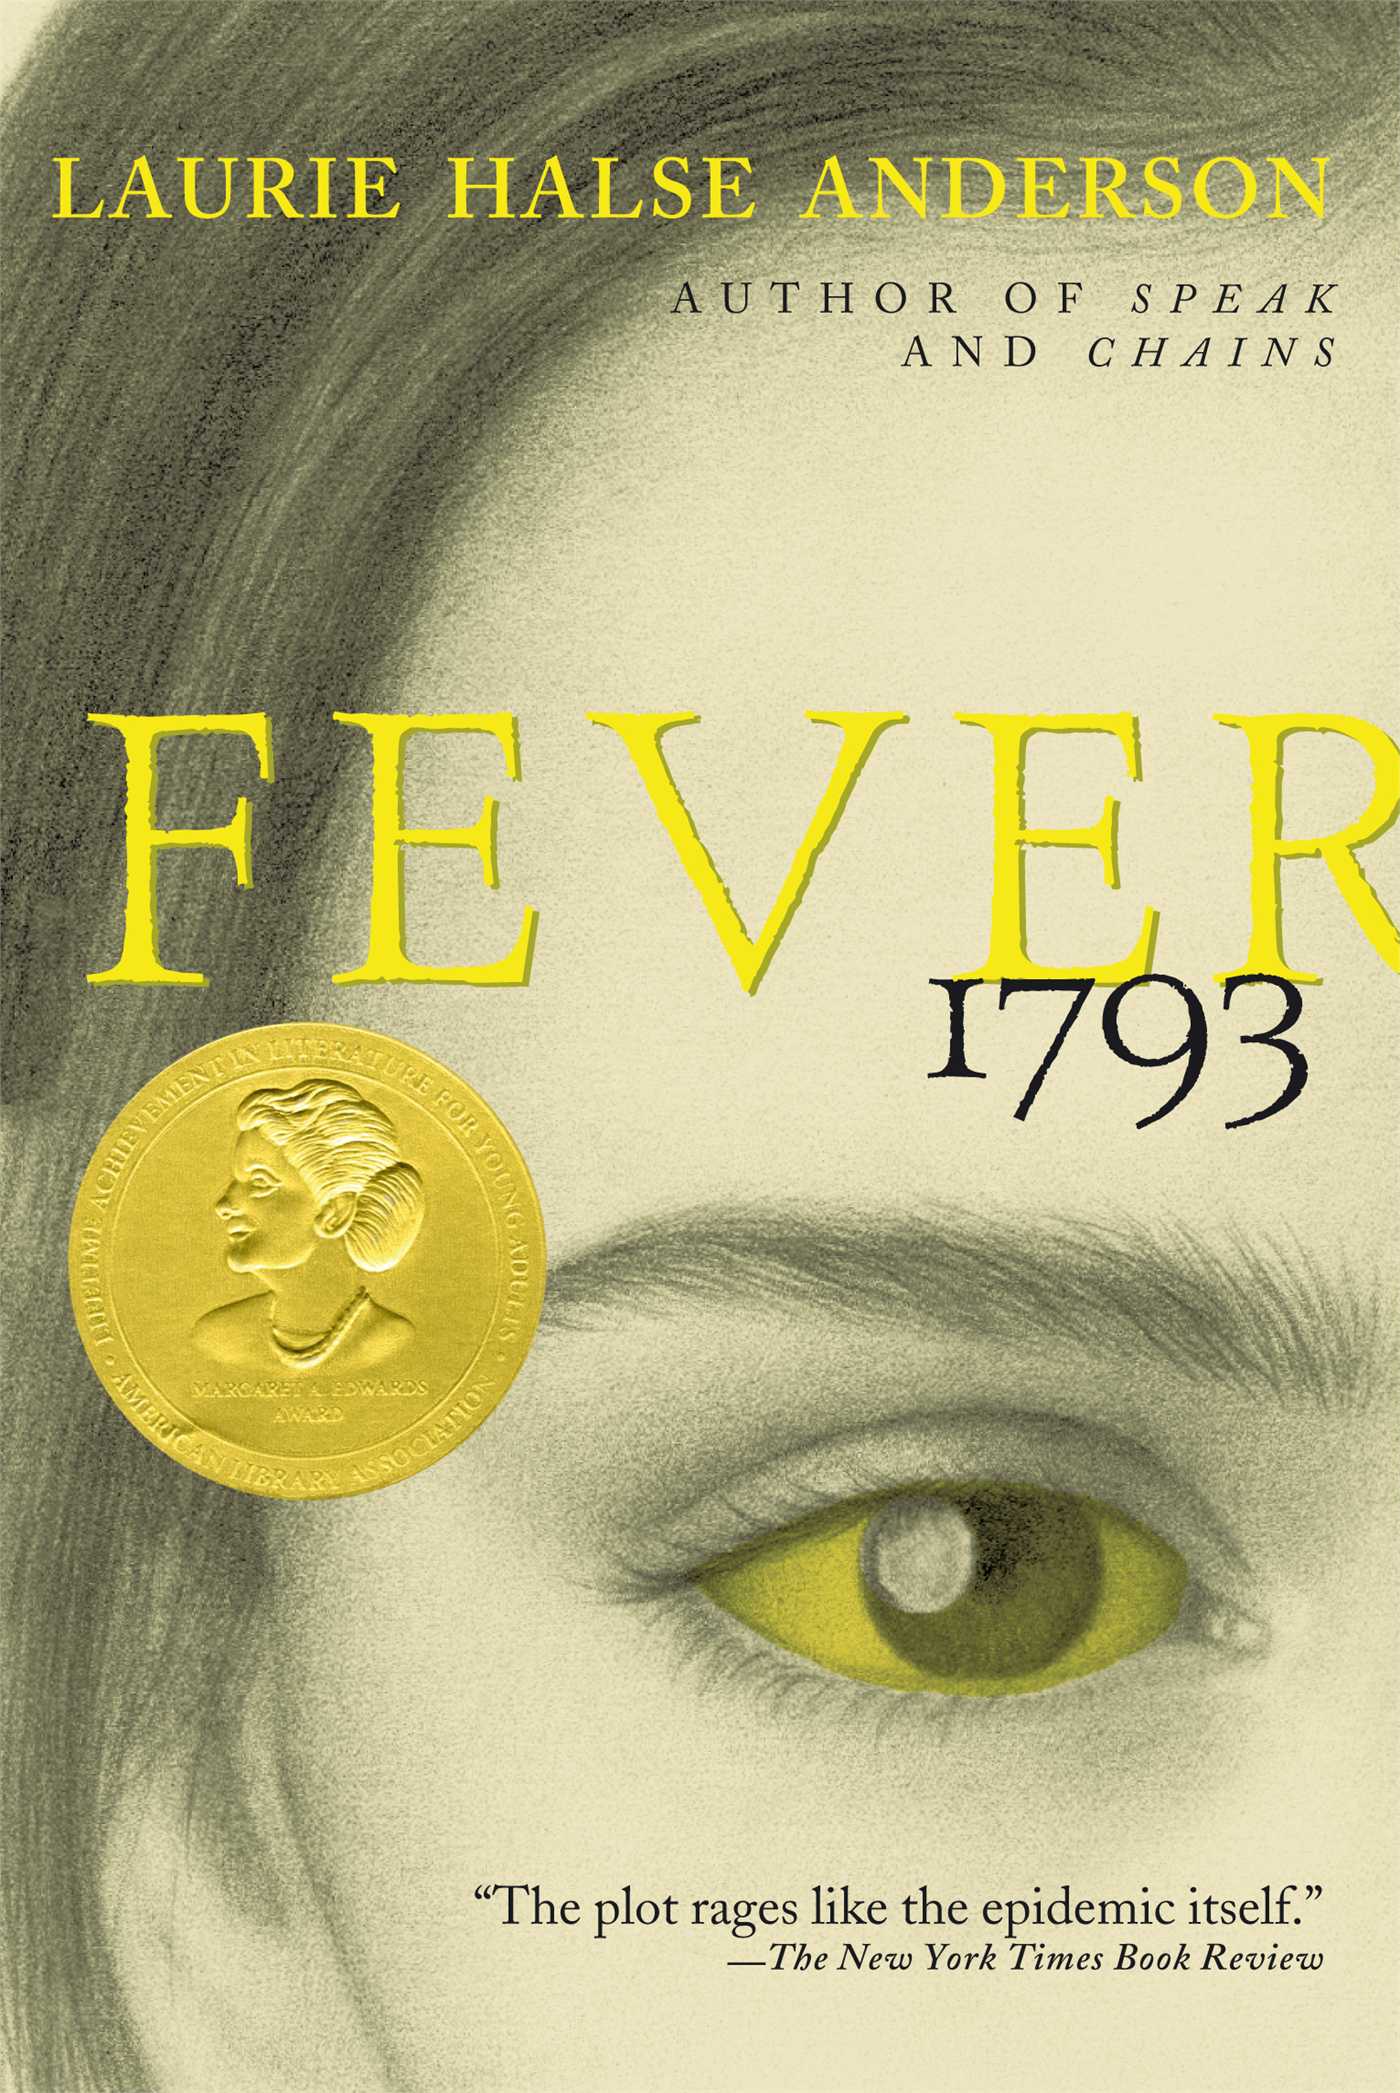 Fever 1793 | Anderson, Laurie Halse